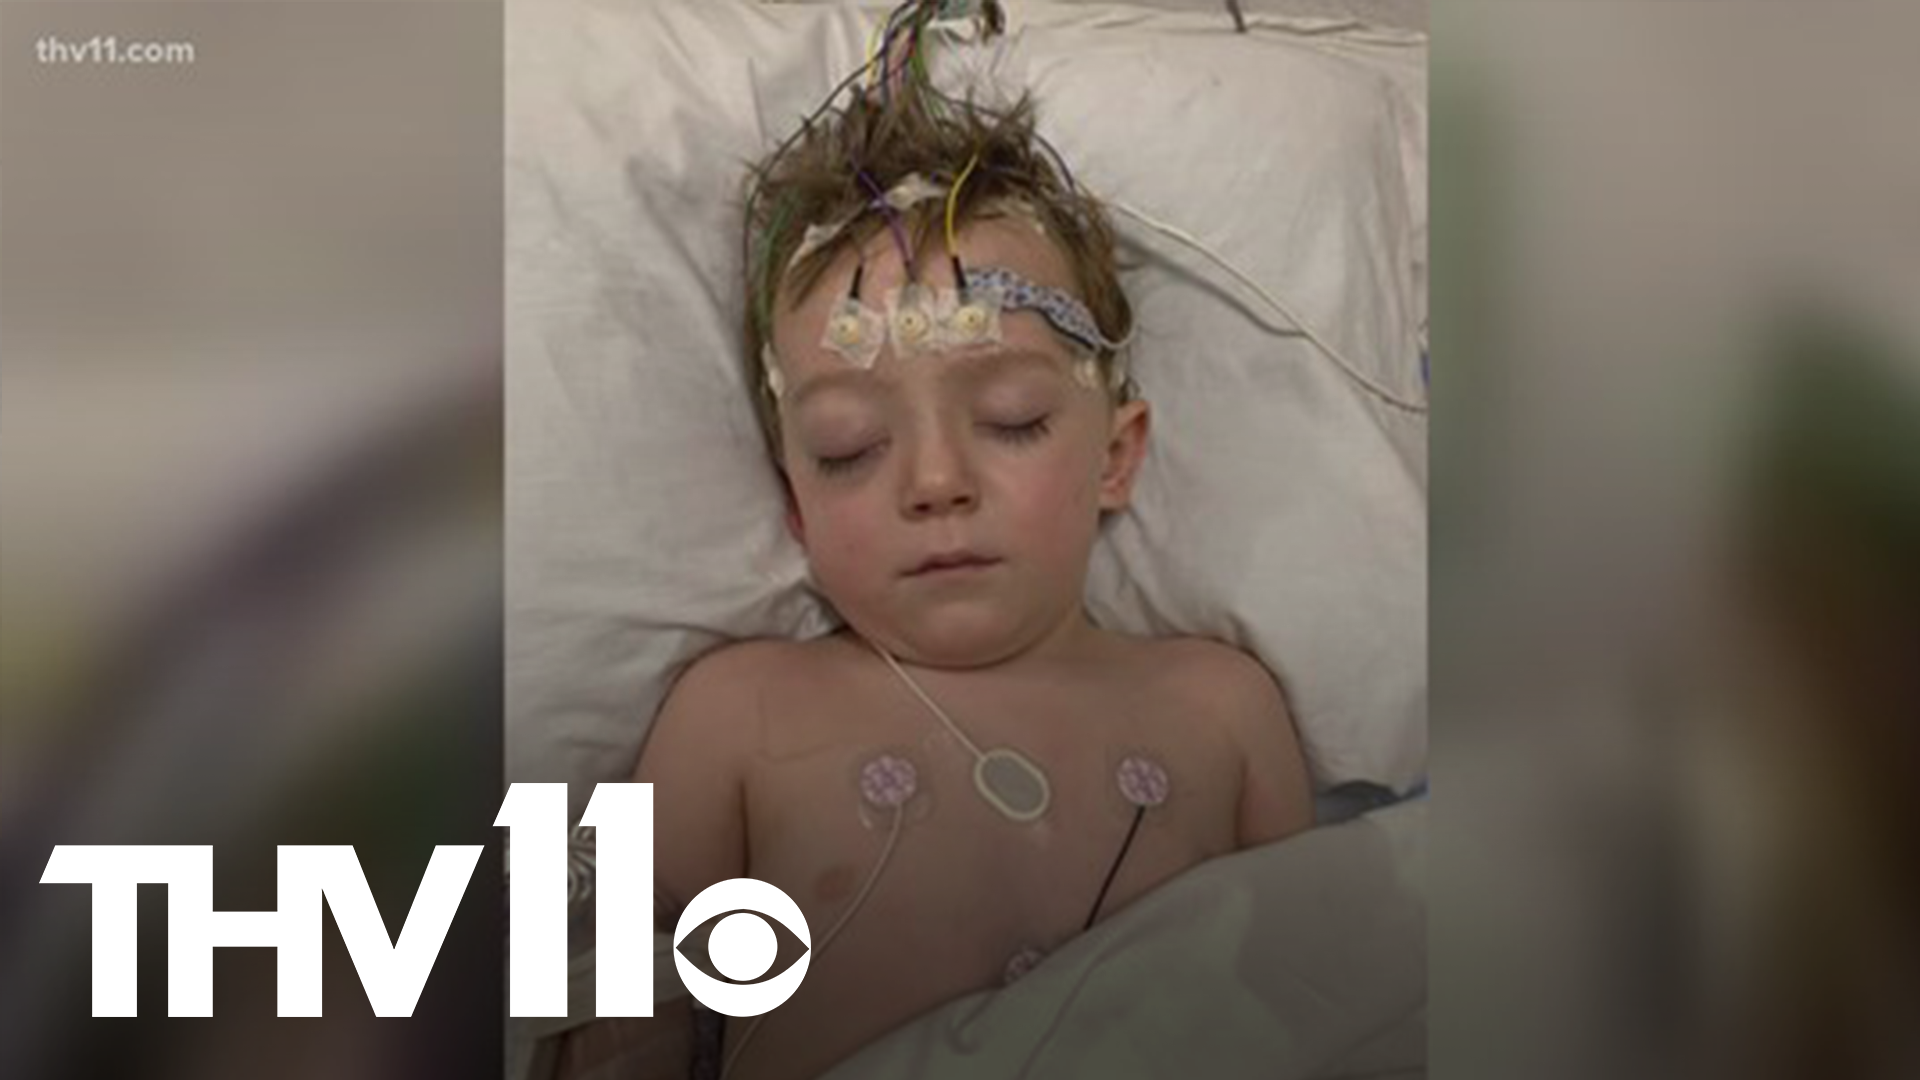 From older Arkansans to the very young, a mom is sharing her child's story after a positive COVID-19 diagnosis.